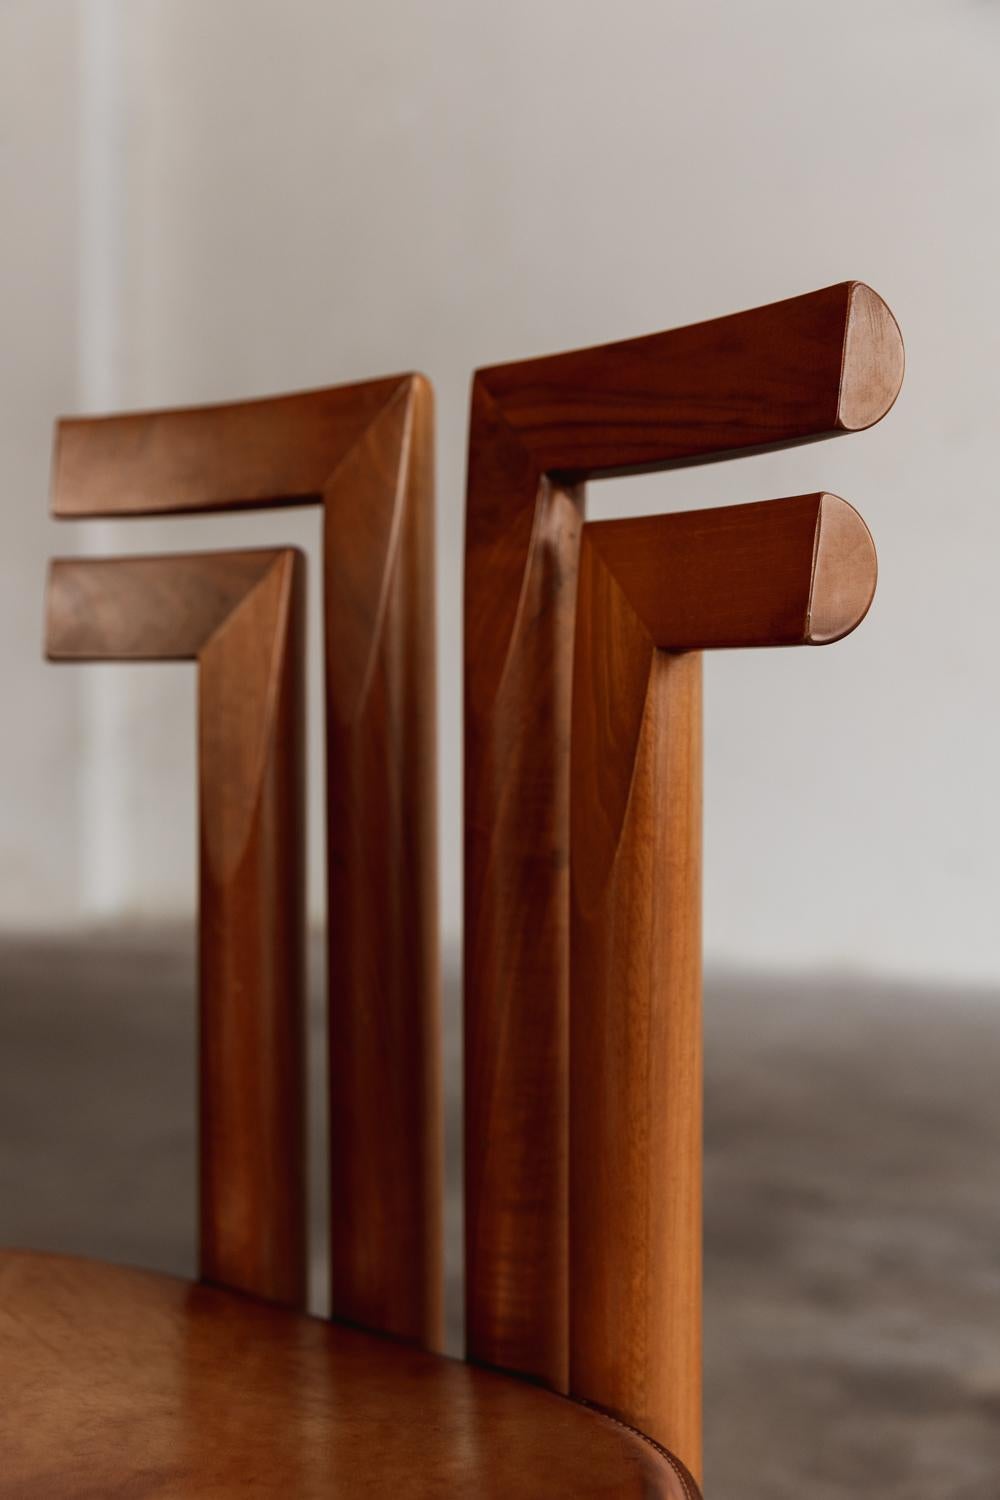 Late 20th Century Mario Marenco “Sapporo” Dining Chairs for Mobil Girgi, 1970, set of 4 For Sale